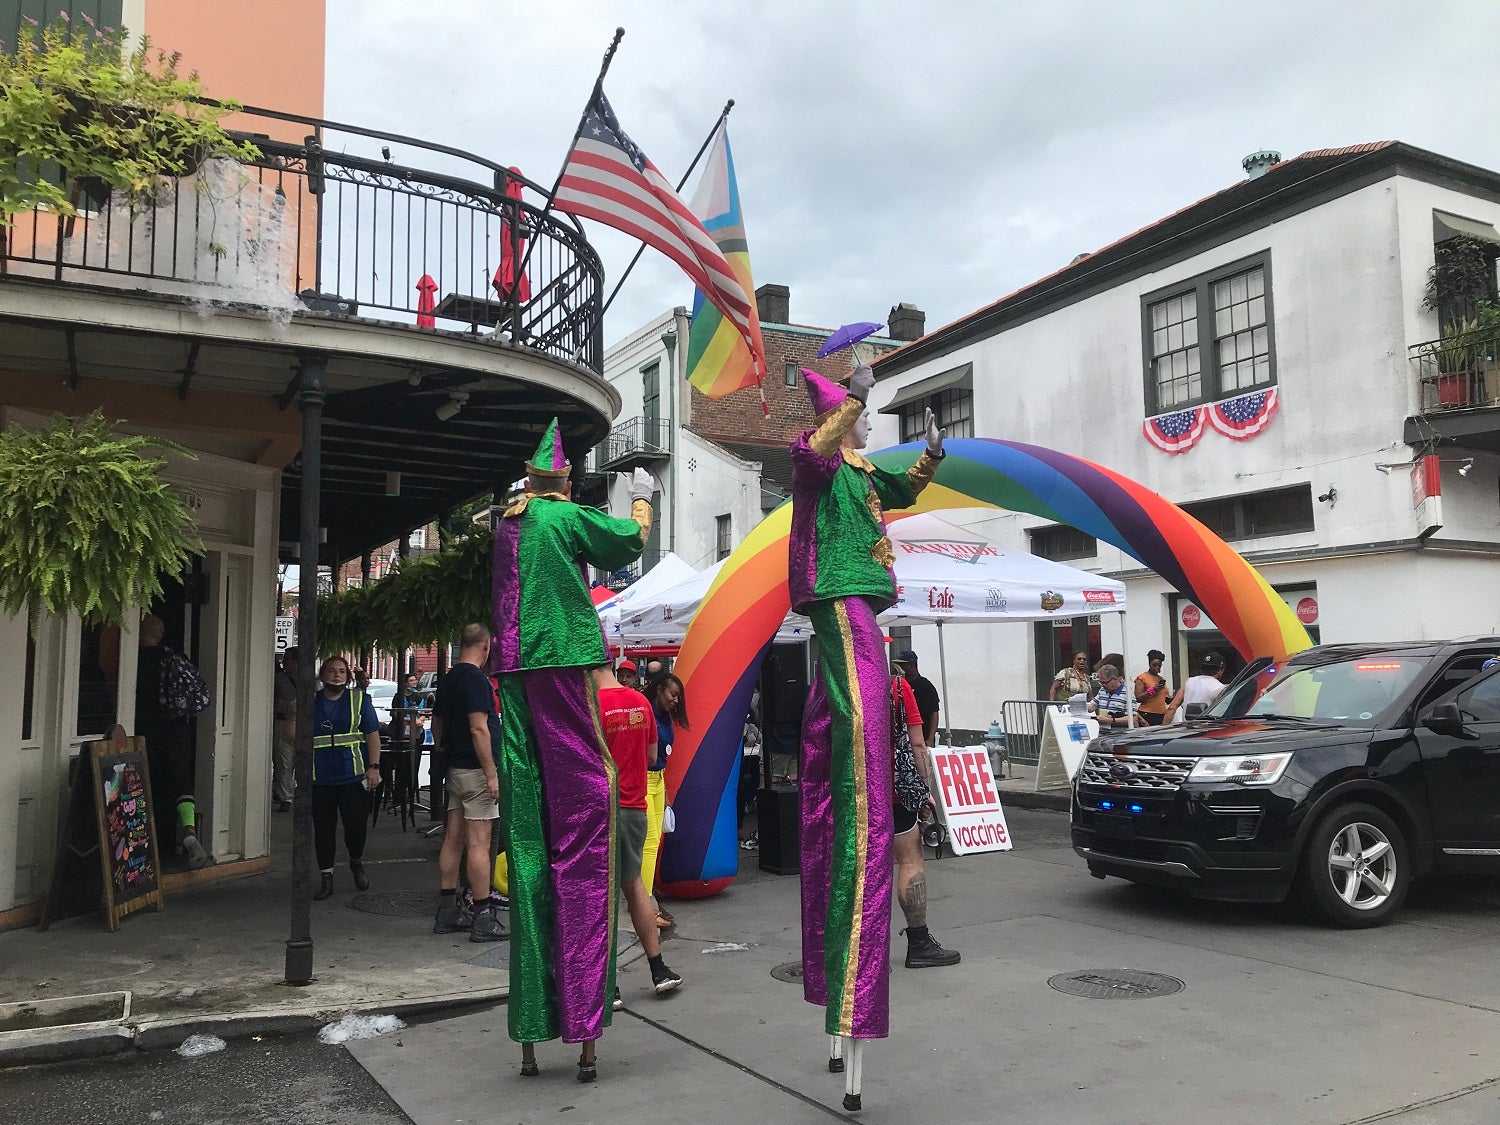 Bourbon Street, New Orleans monkeypox vaccine clinic with clowns on stilts and Pride flags waving